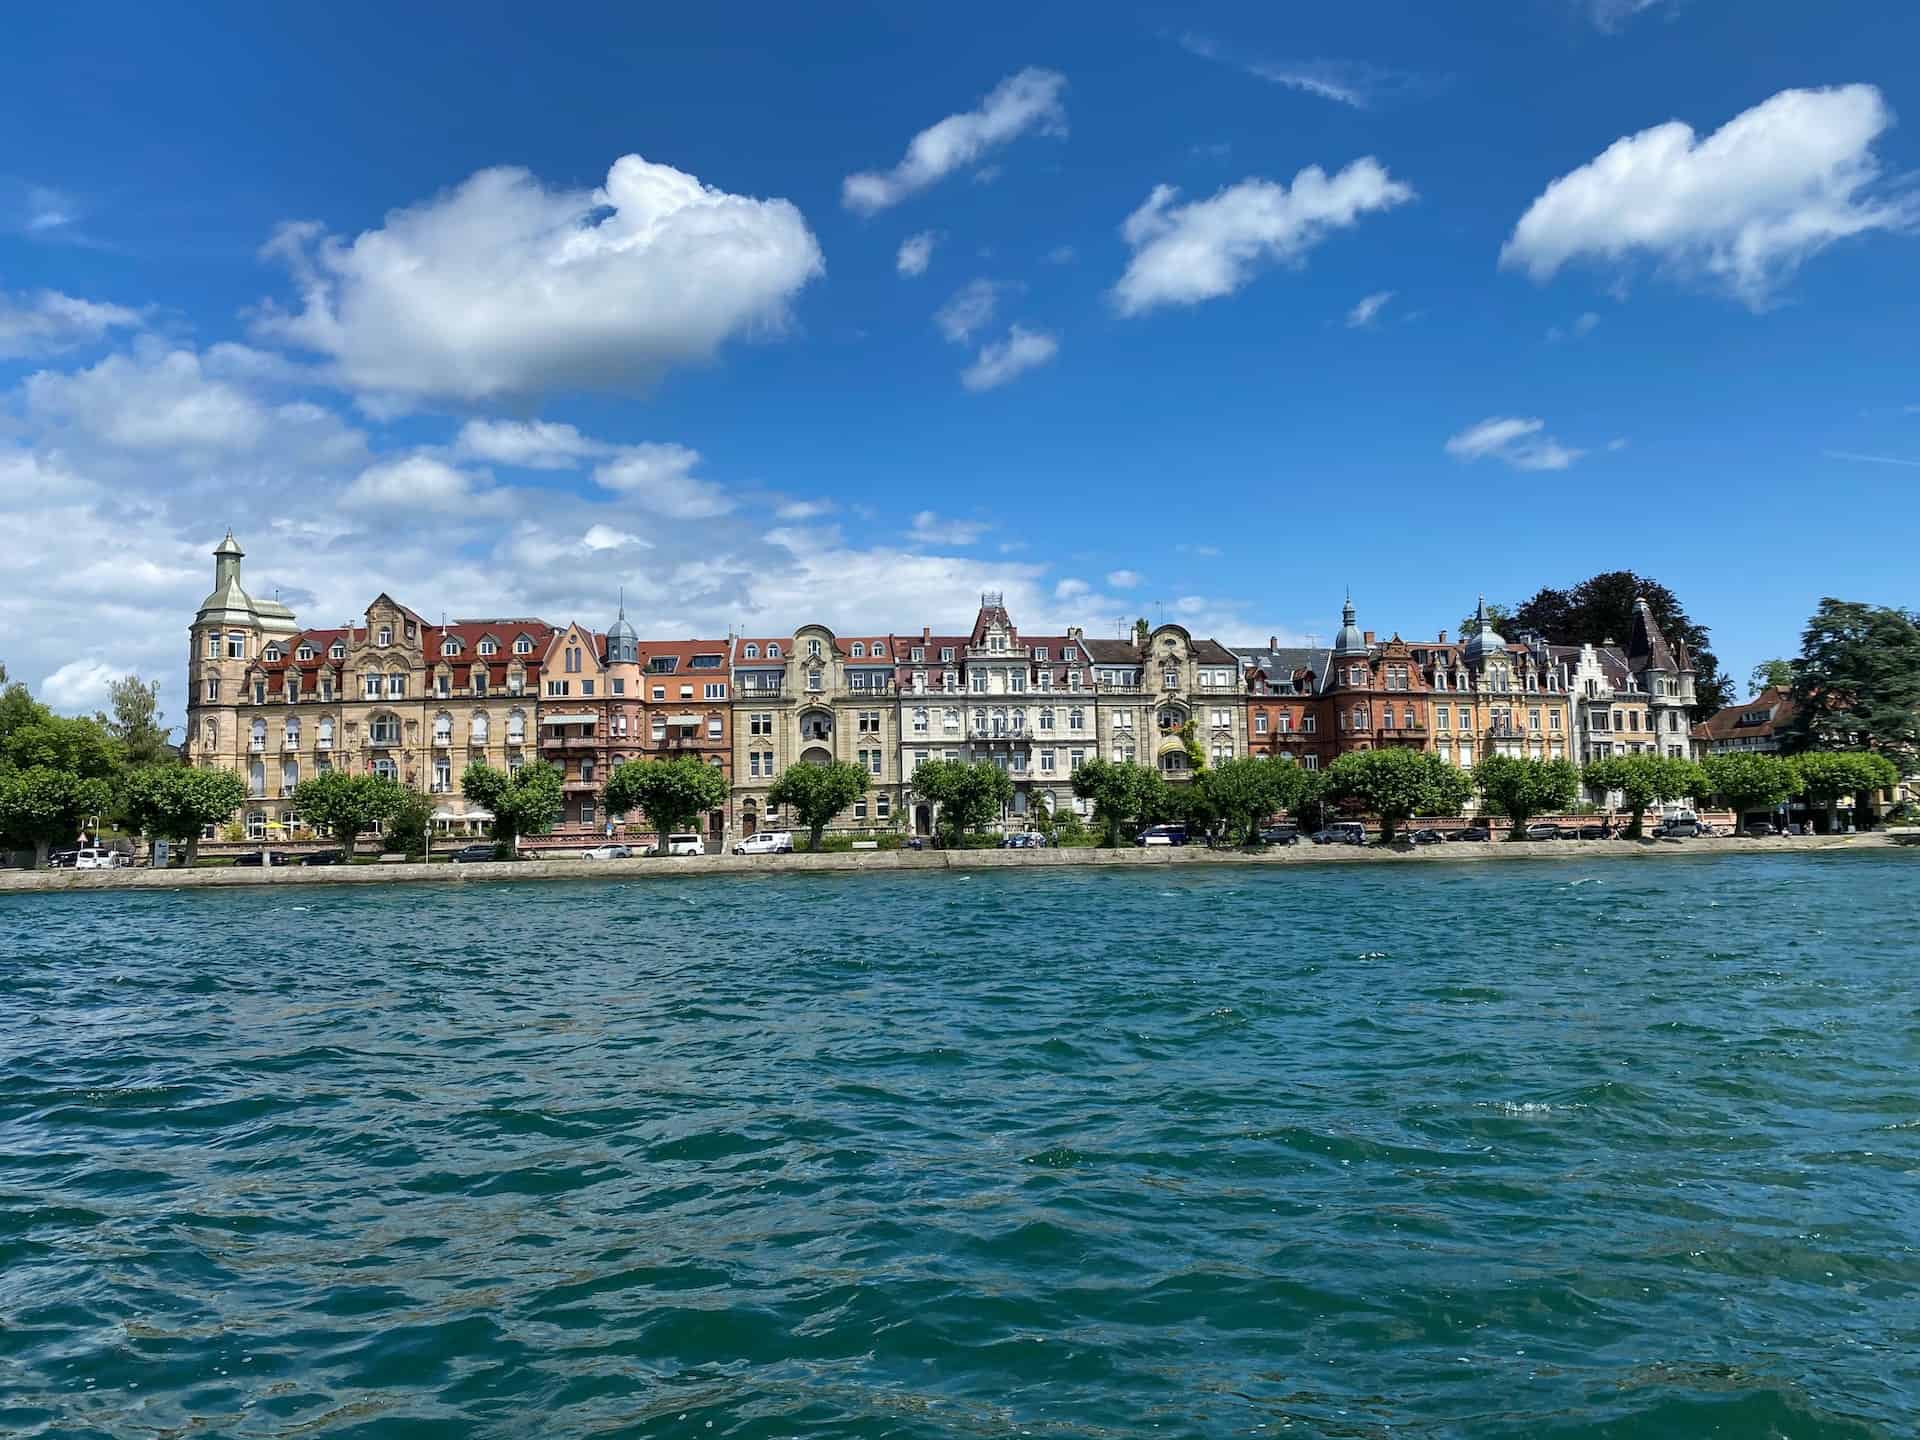 Best things to do in Konstanz Germany - Jean and Patti - Row homes on the edge of the lake by Datingjungle on Unsplash